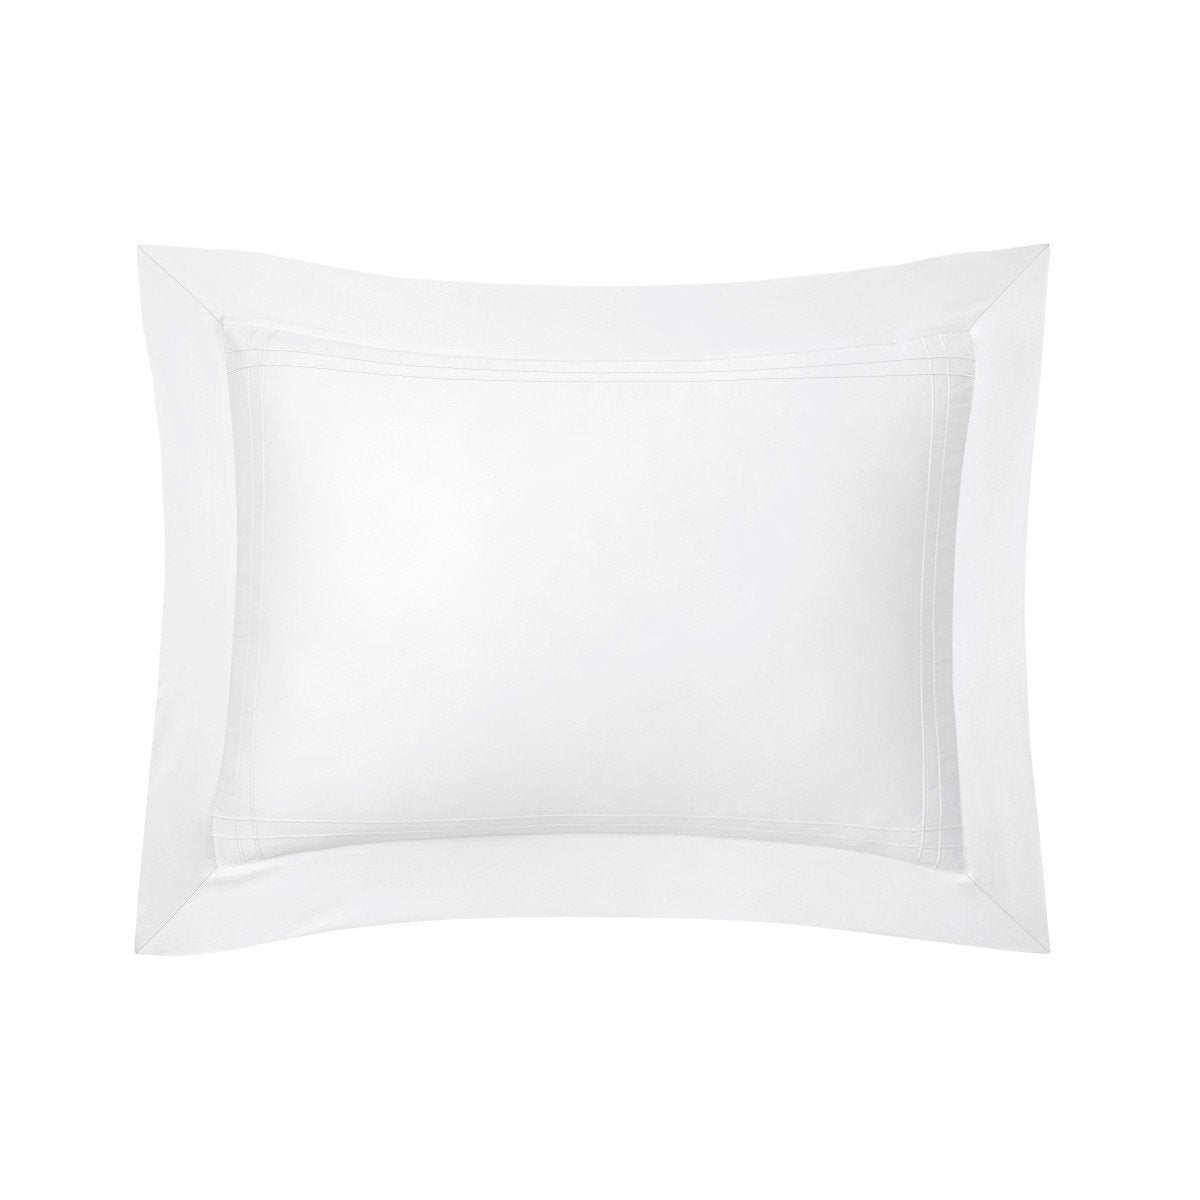 Adagio Blanc Bedding Collection by Yves Delorme | Fig Linens - white, cotton, luxury standard sham